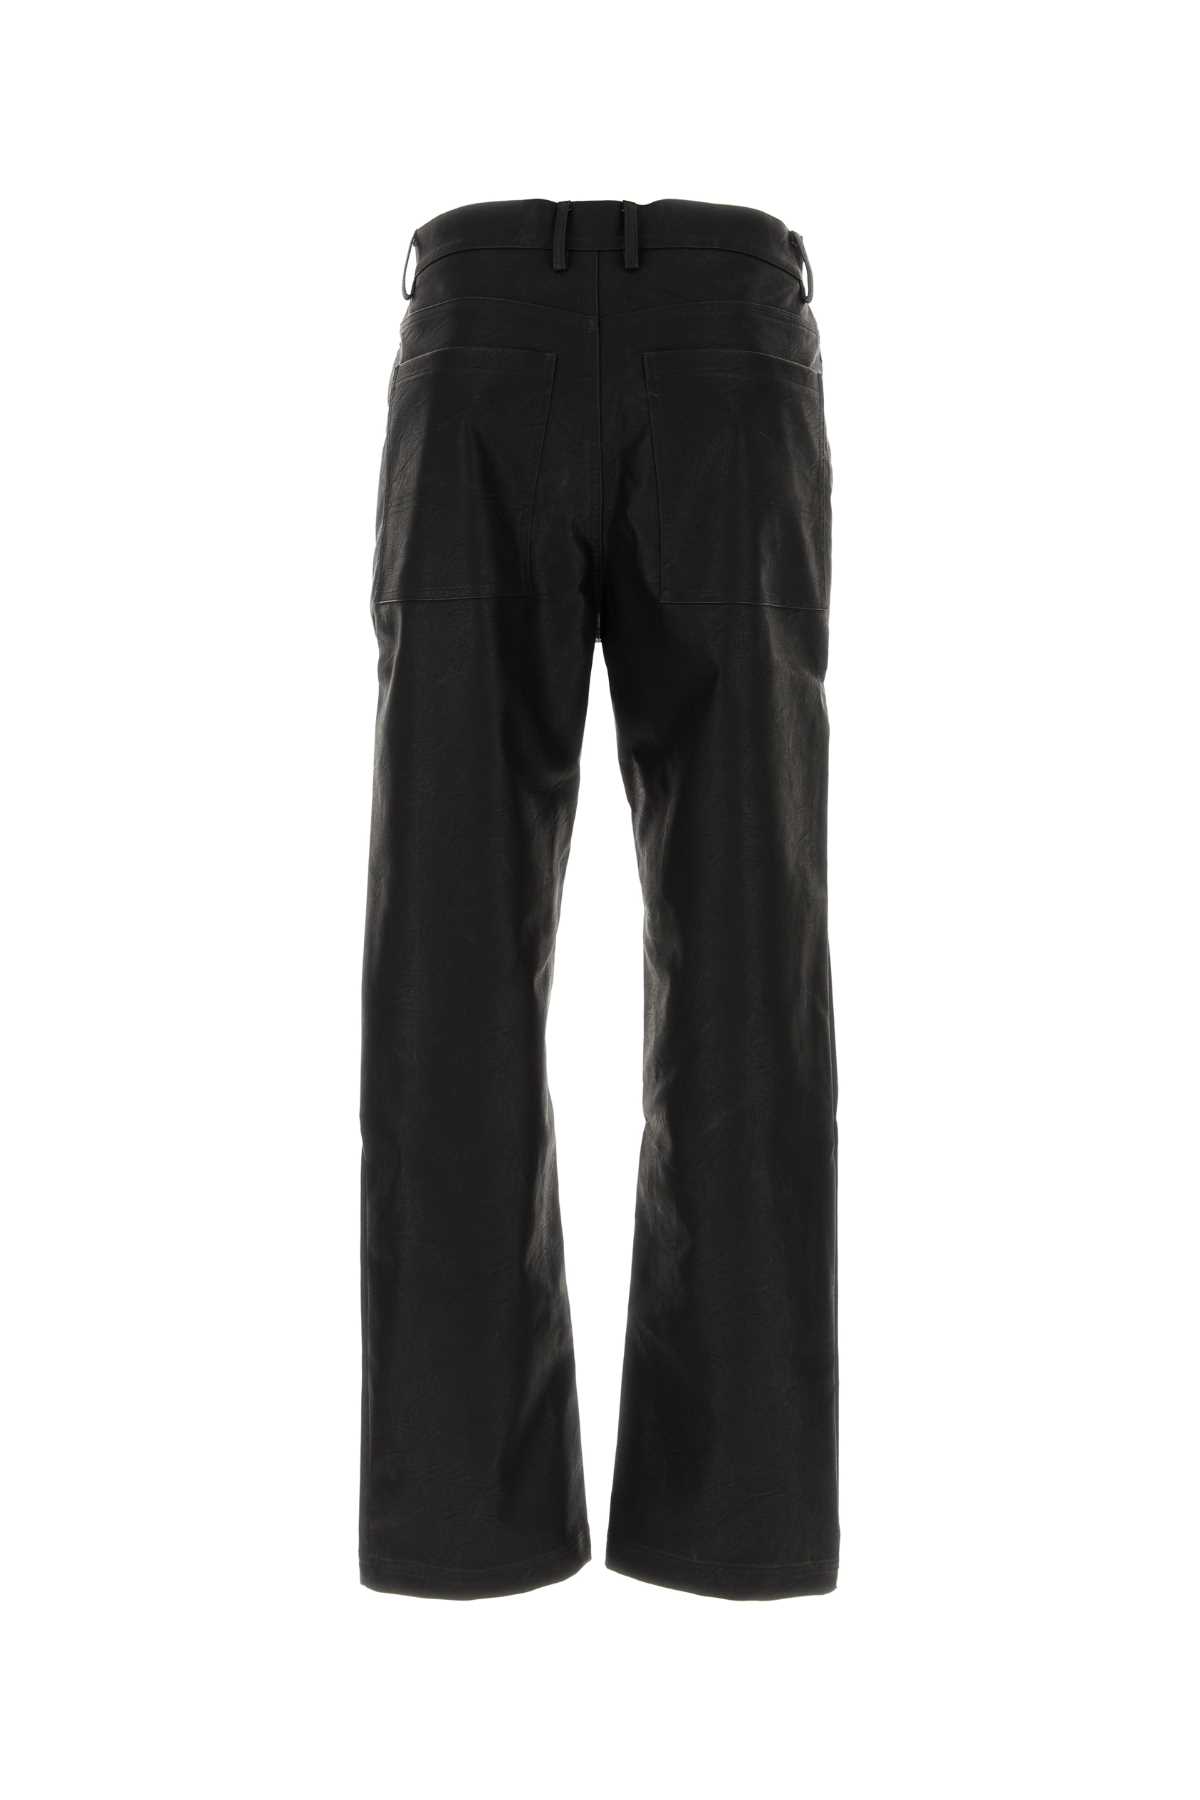 ENTIRE STUDIOS BLACK SYNTHETIC LEATHER PANT